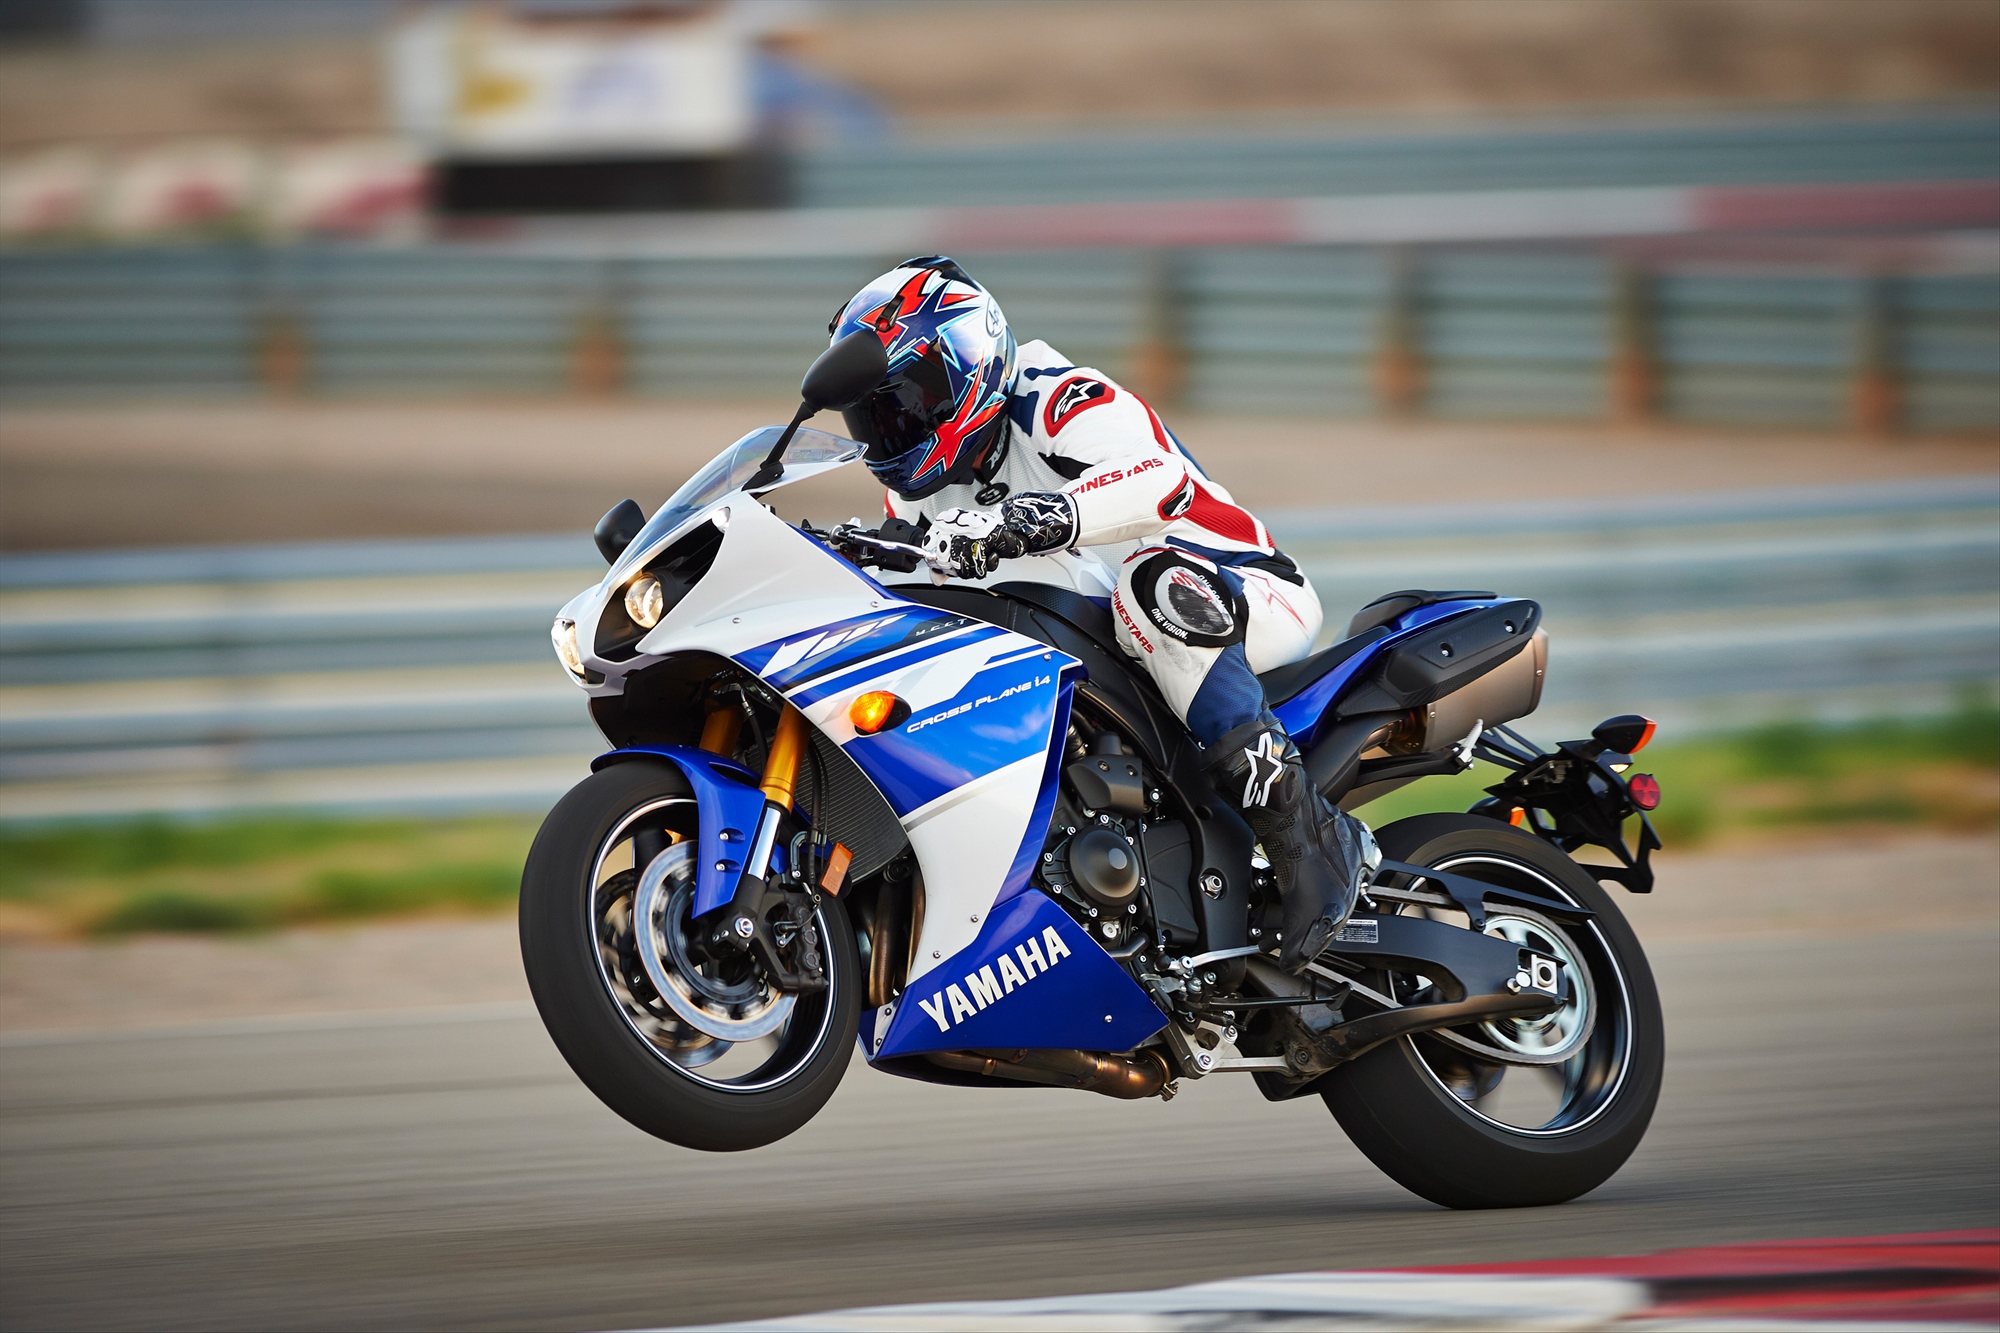 2014 Yamaha YZF-R1 Official Pictures and Prices - autoevolution